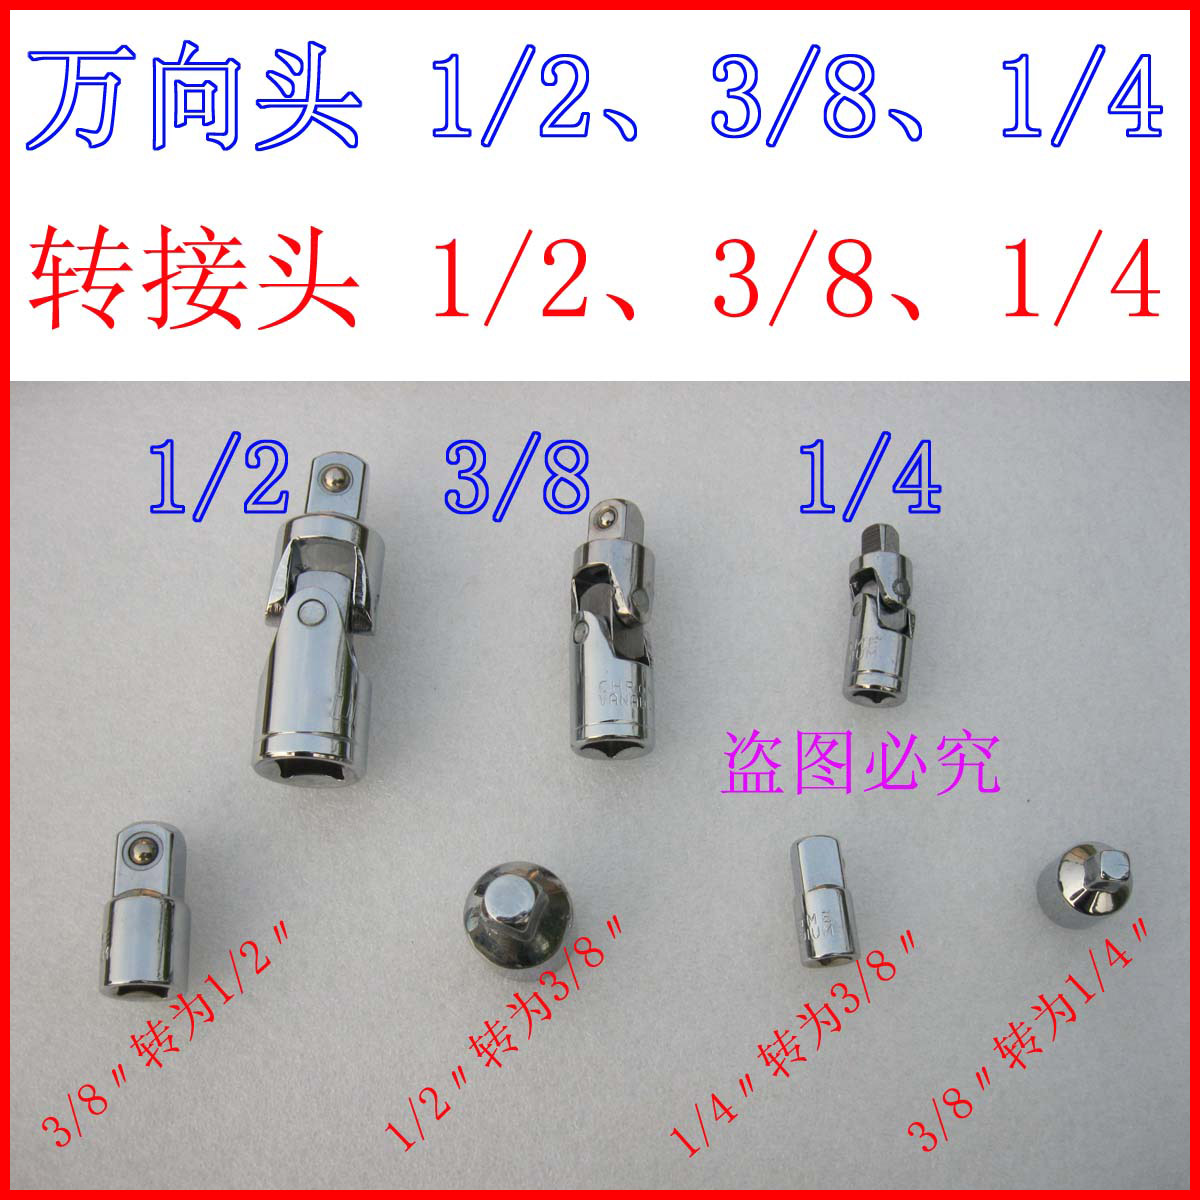 Sleeve adapter Size head changing head 1 4 turn 3 8 turn 1 2 connecting head square hole lengthened lever